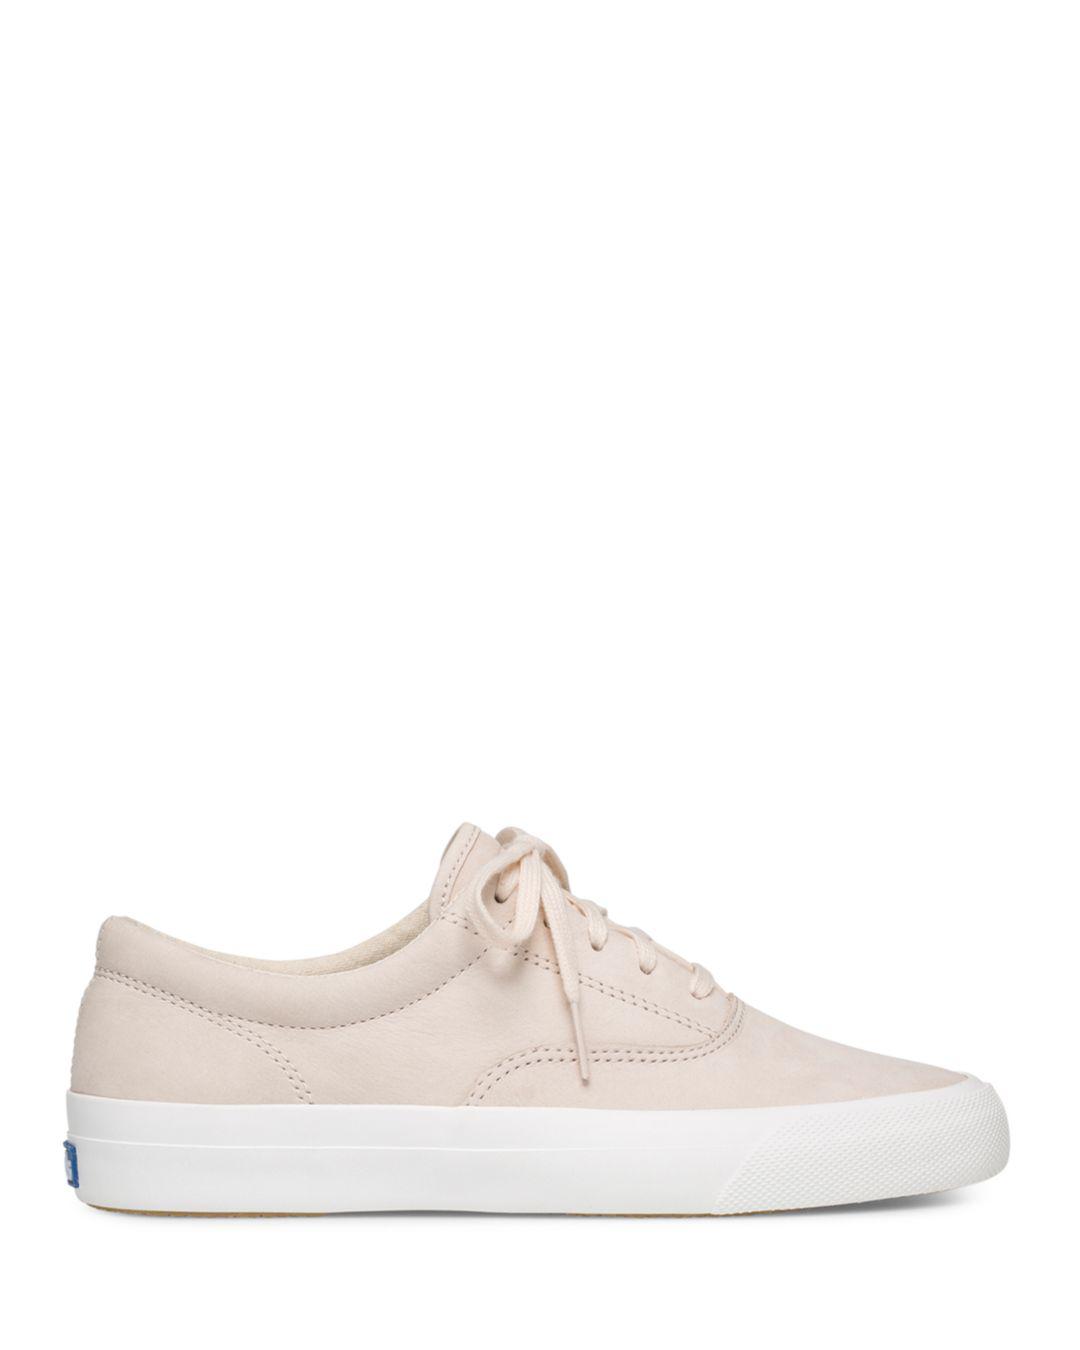 keds anchor leather